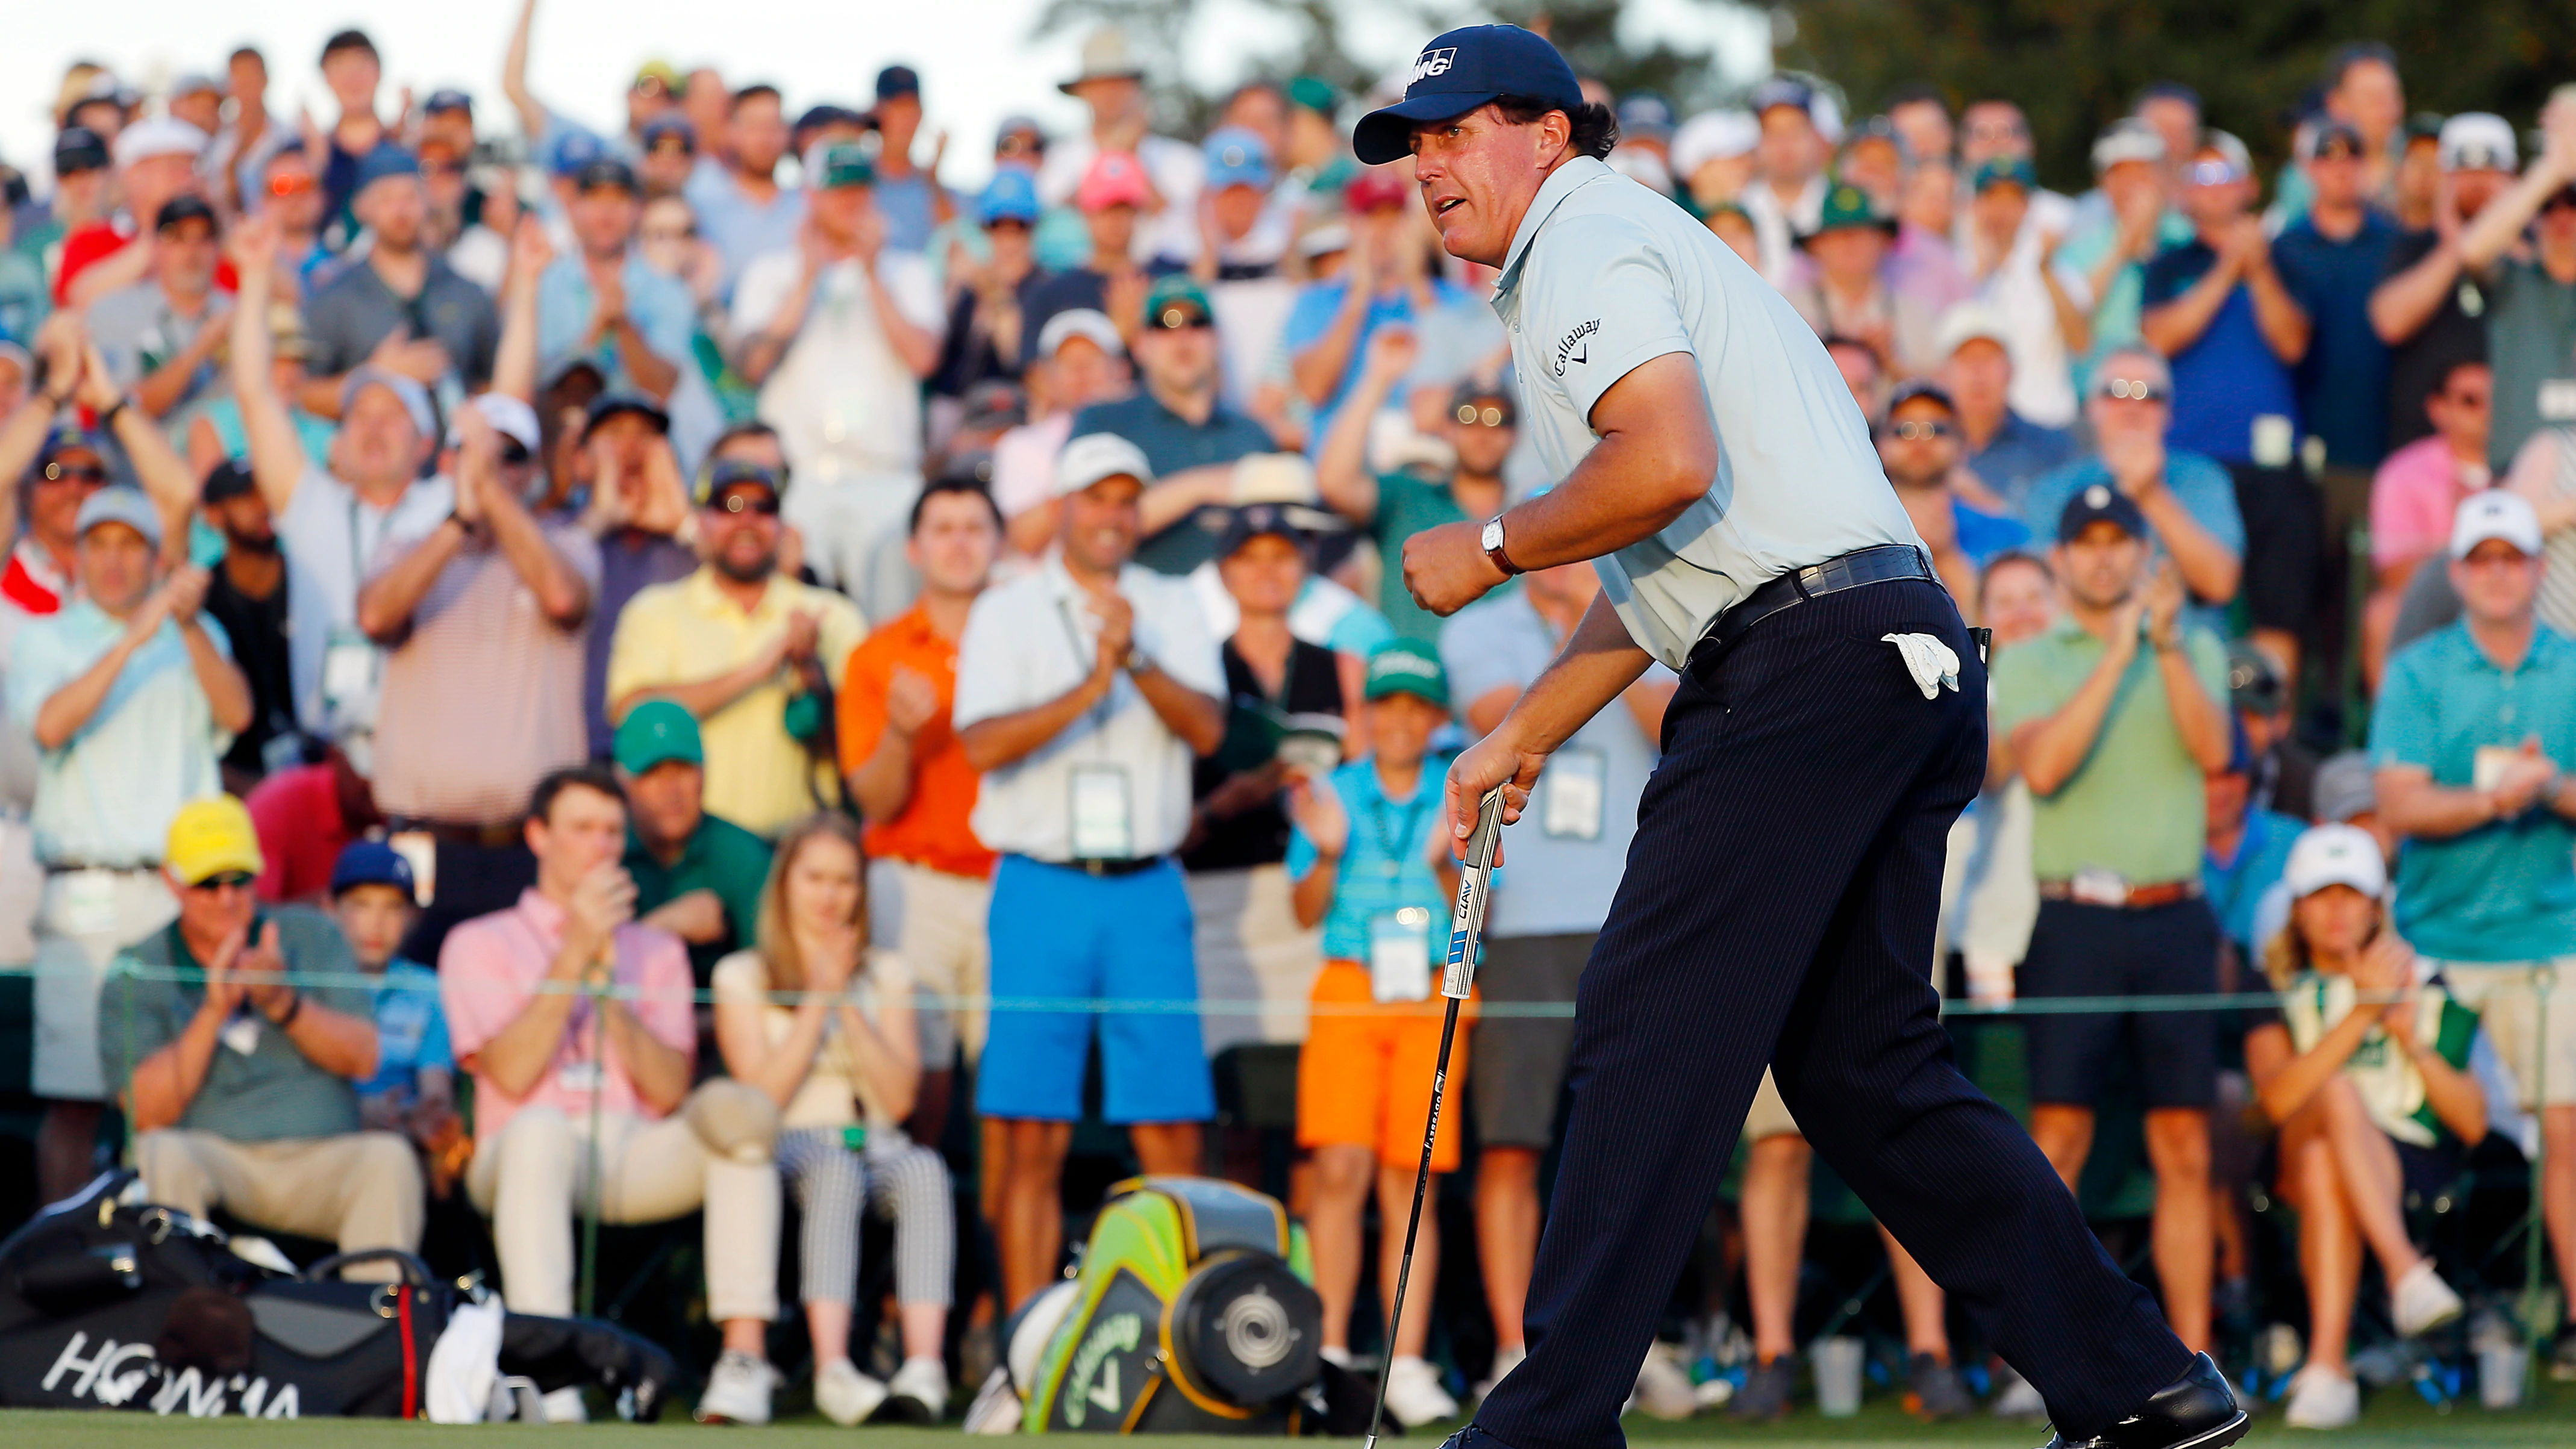 Mickelson (67) scrambles to lowest opening round since 2010 Masters win